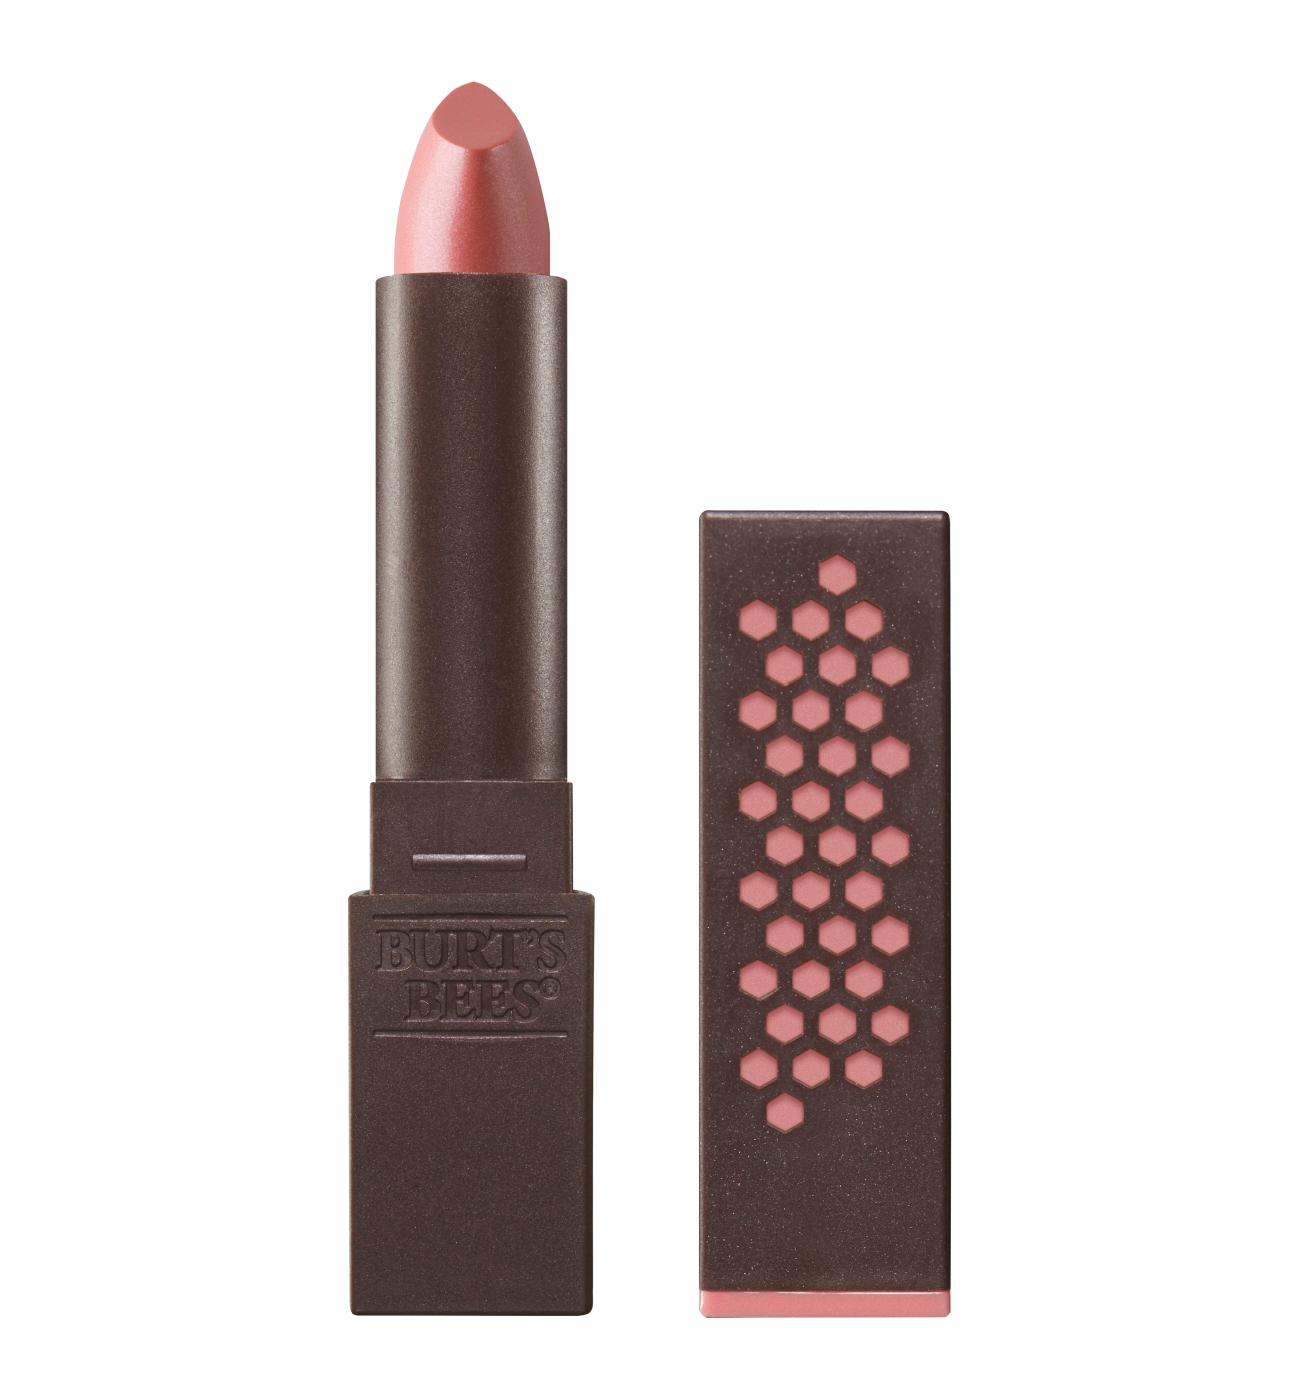 Burt's Bees Natural Glossy Lipstick - Nude Mist; image 2 of 2